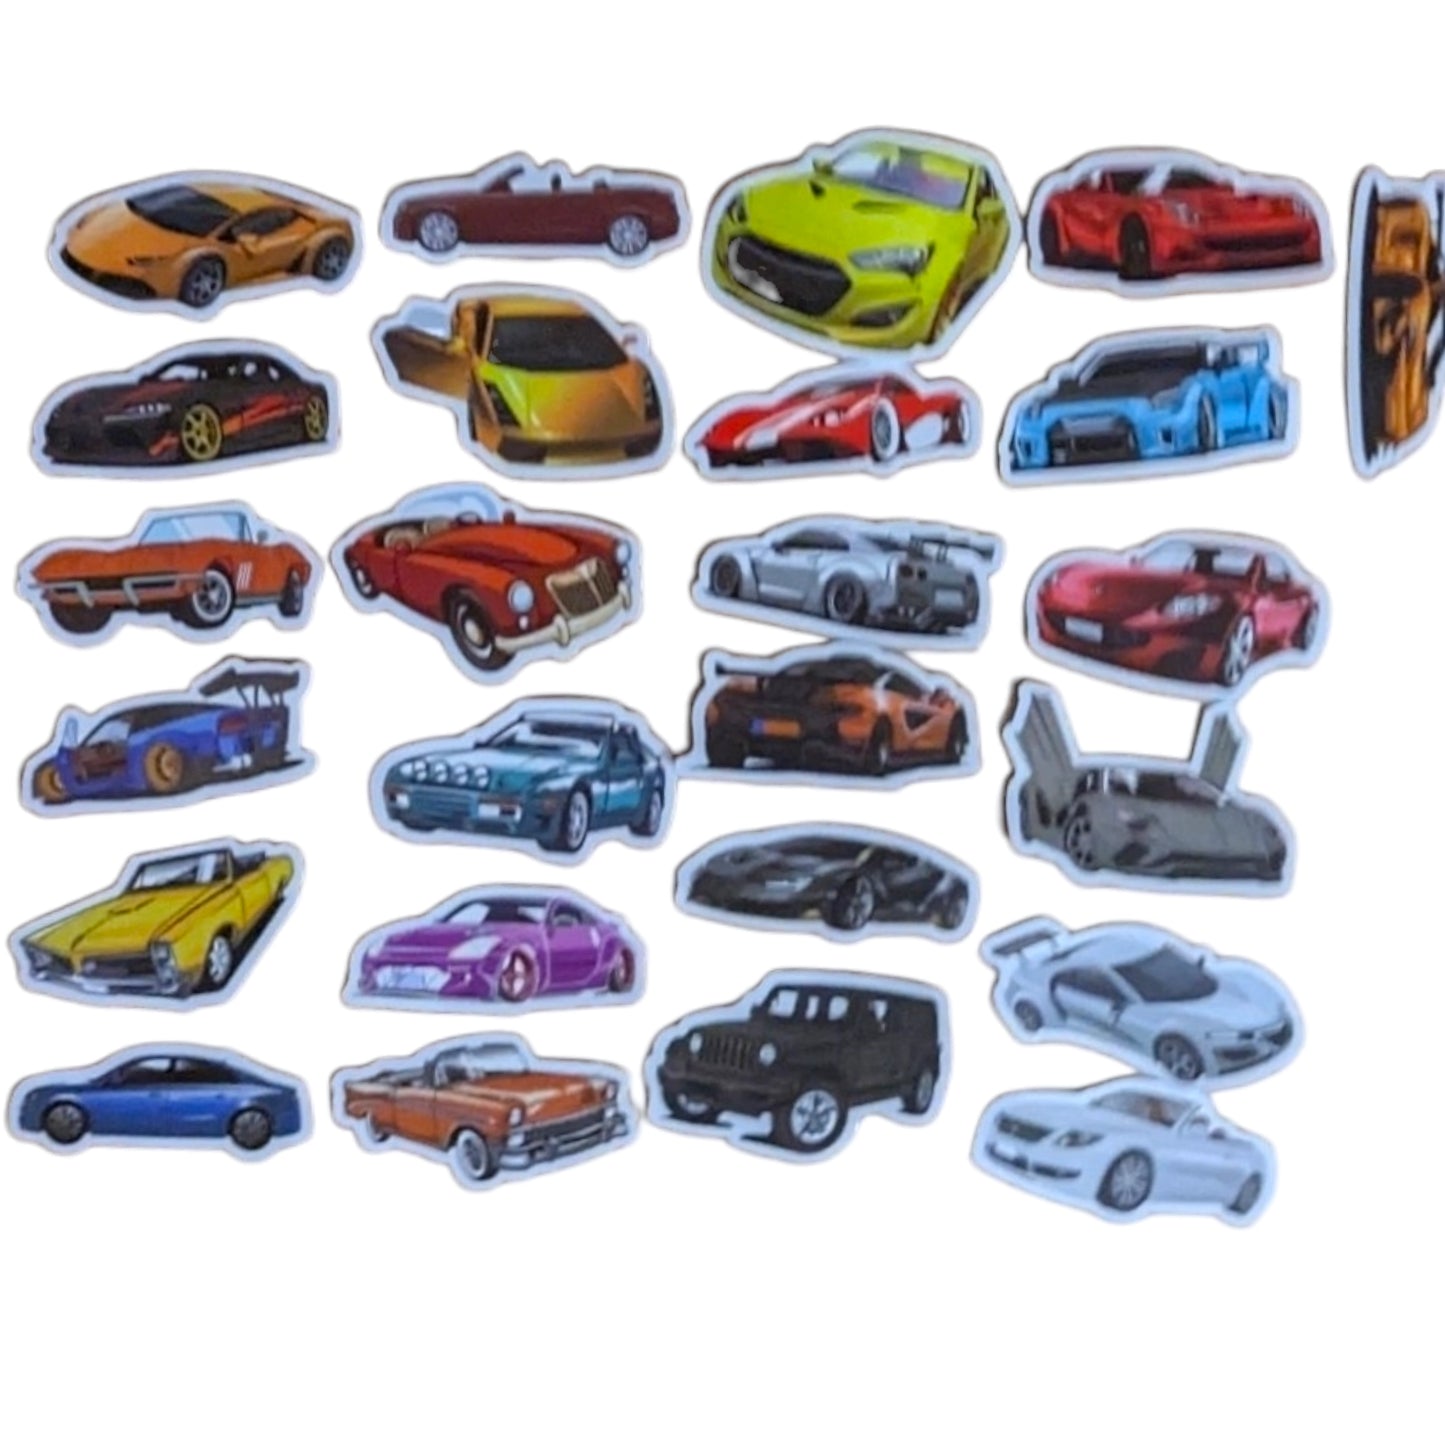 STICKER PACK - Pack #43  - 25 Pieces - Cars